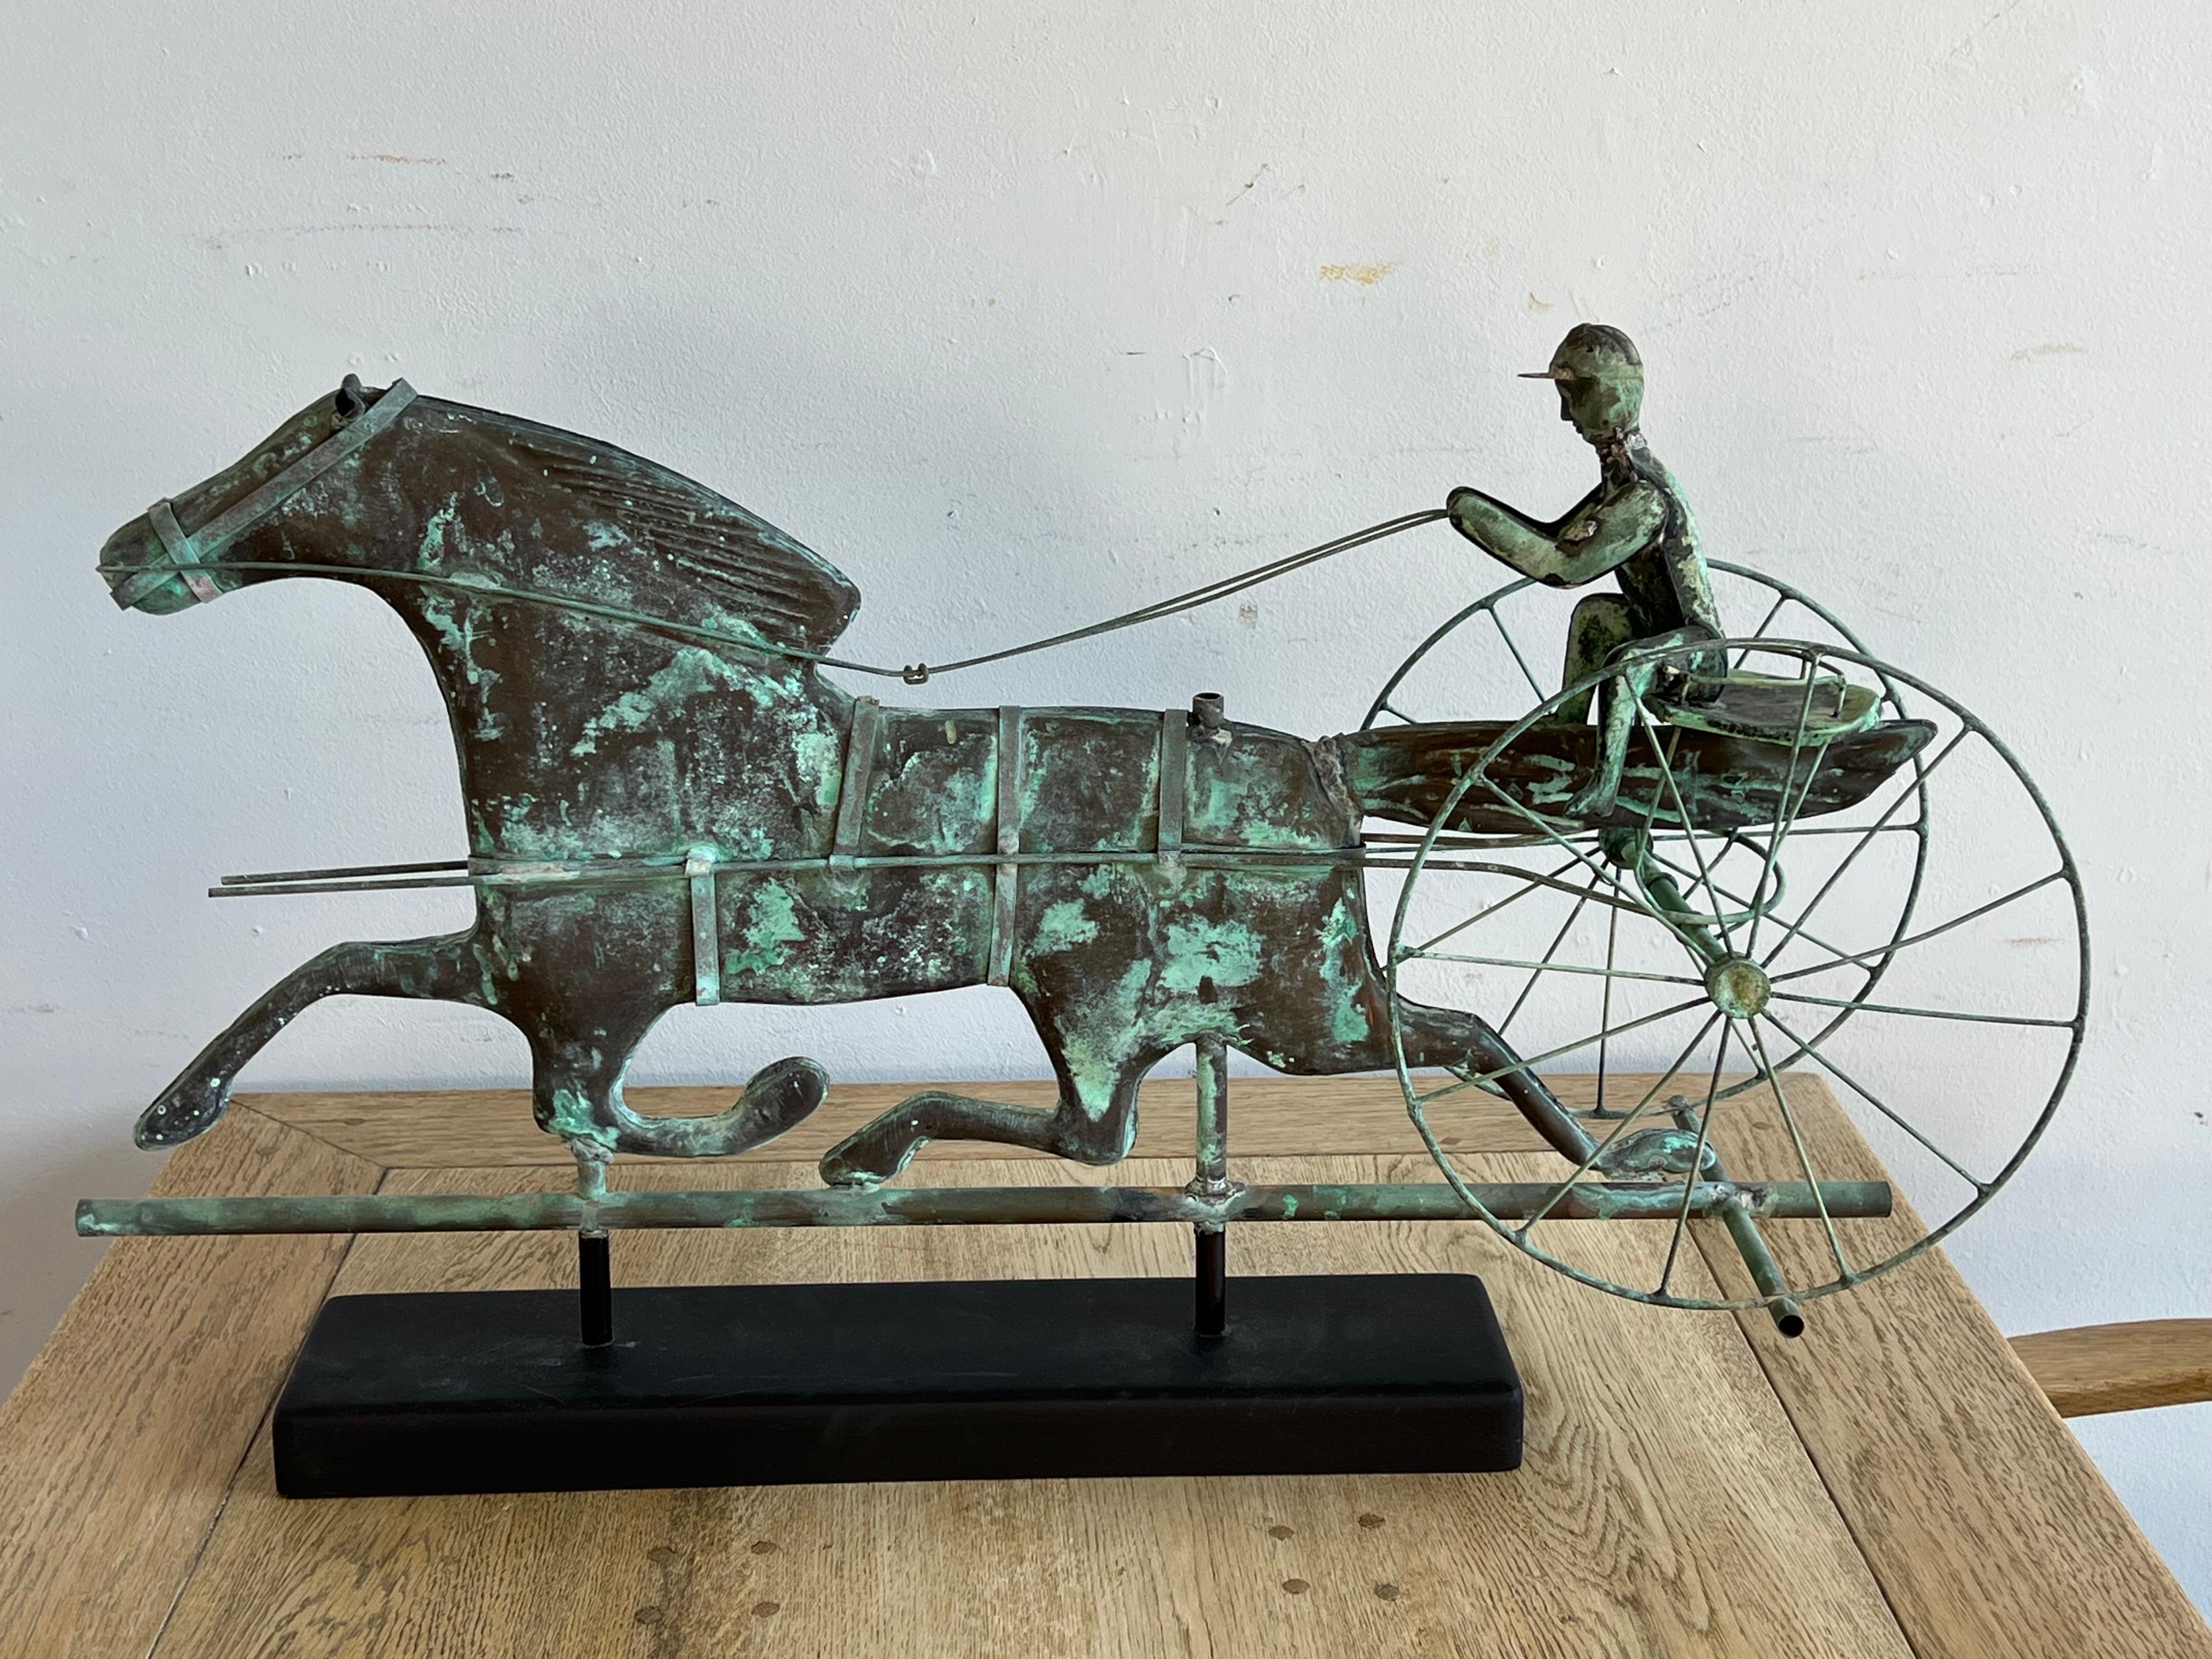 19th C. molded sheet copper horse and driver vane with cast iron horse's head and driver's hands, sheet copper reins and seat, copper rod wheels, mounted on a wood ebony colored base. The copper has developed a beautiful patina over the years